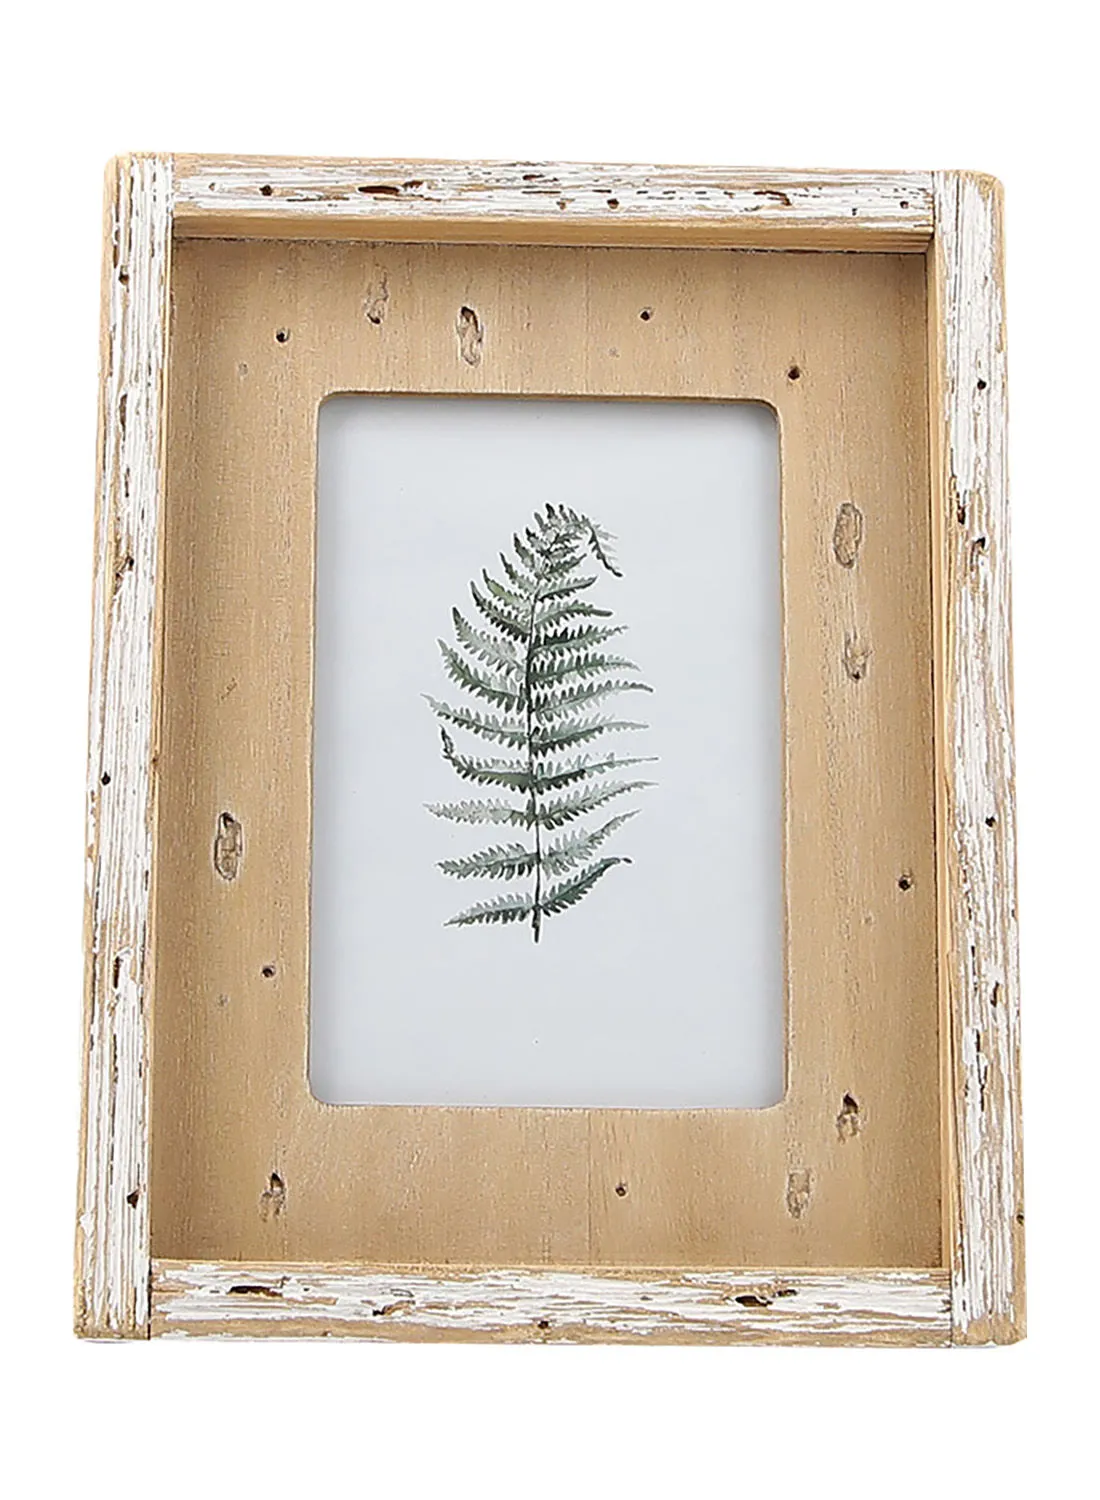 ebb & flow Tabletop Photo Frames With Natural Outer frame size--L18 x H23 cm   Photo size--4x6 inch